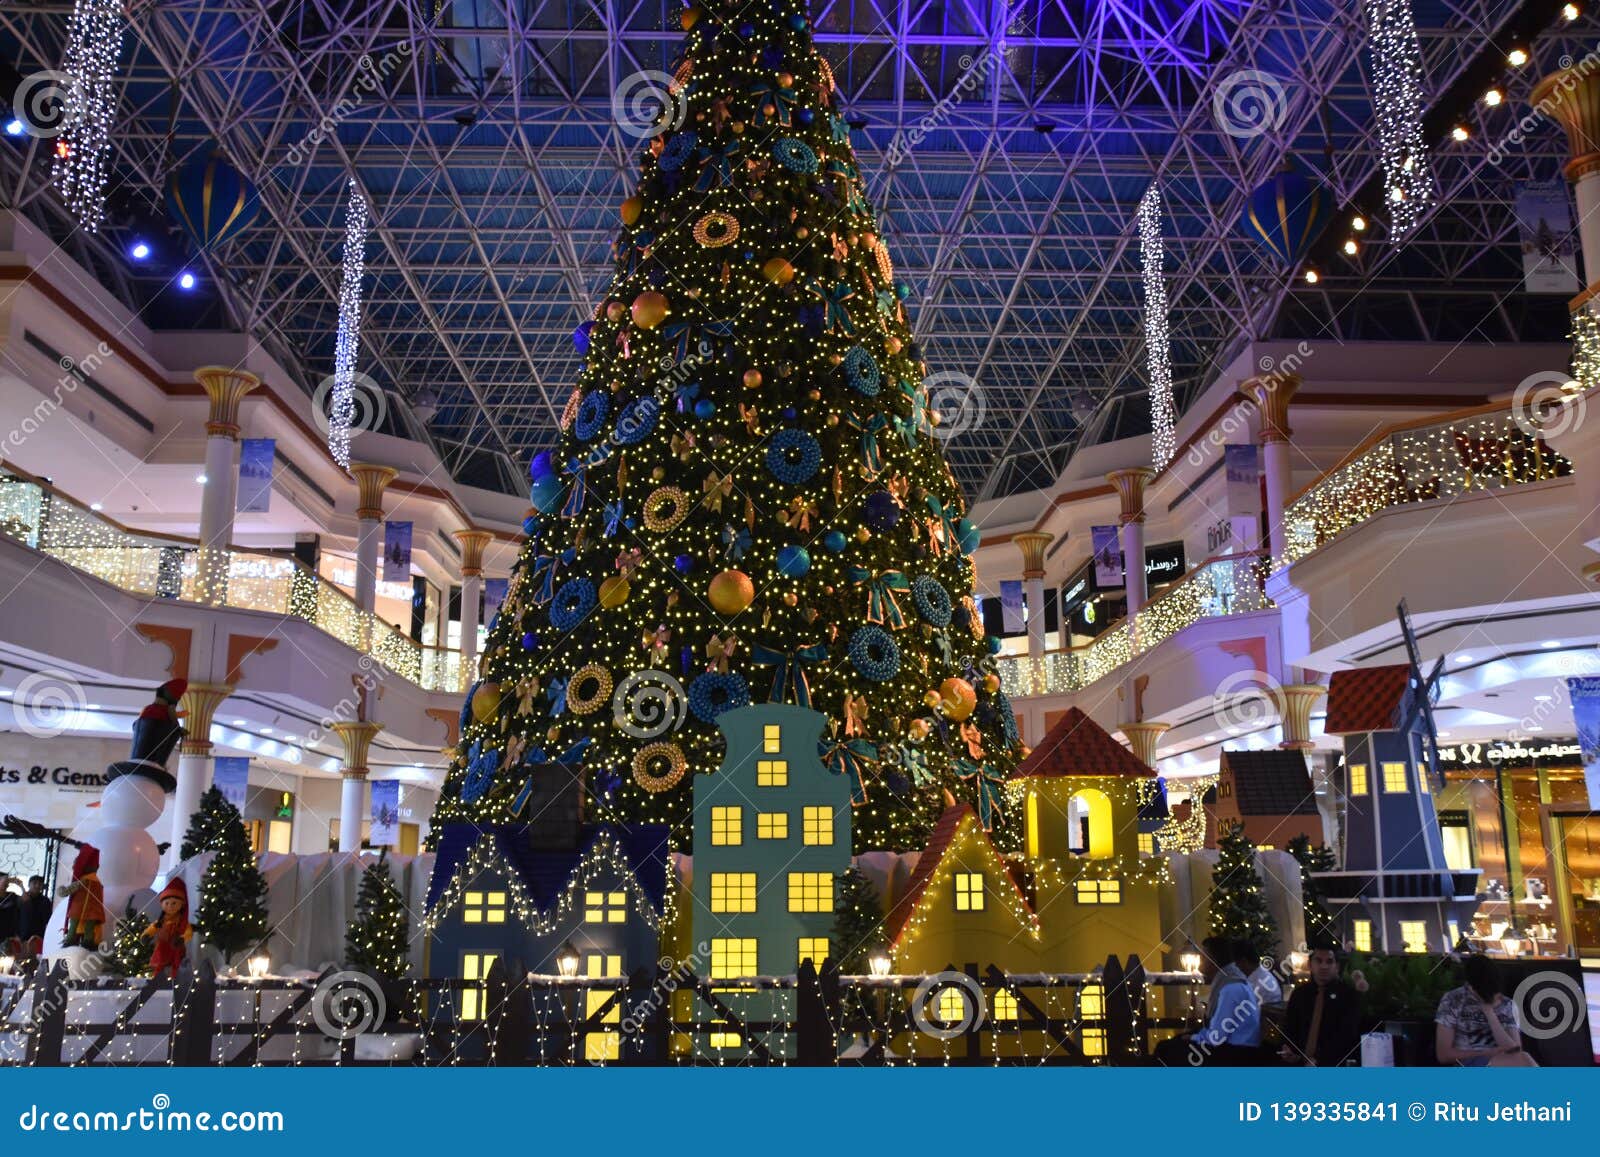 Christmas shopping and fanfare in full swing across UAE | Lifestyle-photos  – Gulf News